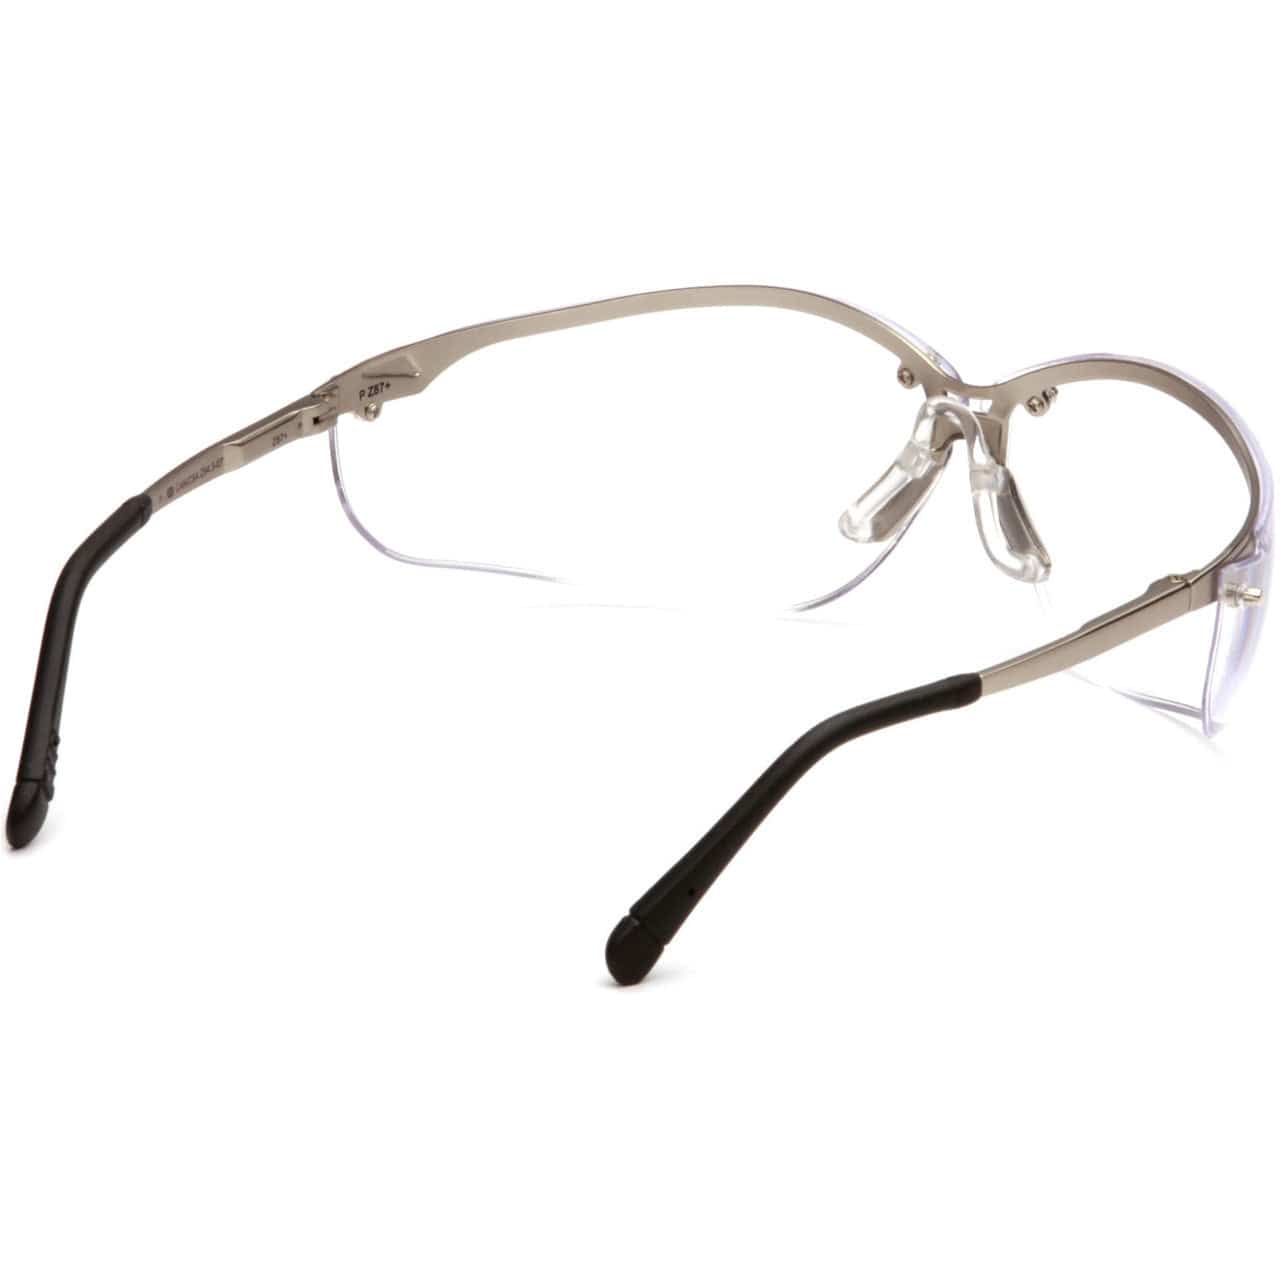 Pyramex V2 Metal Safety Glasses with Clear Lens SGM1810S Back